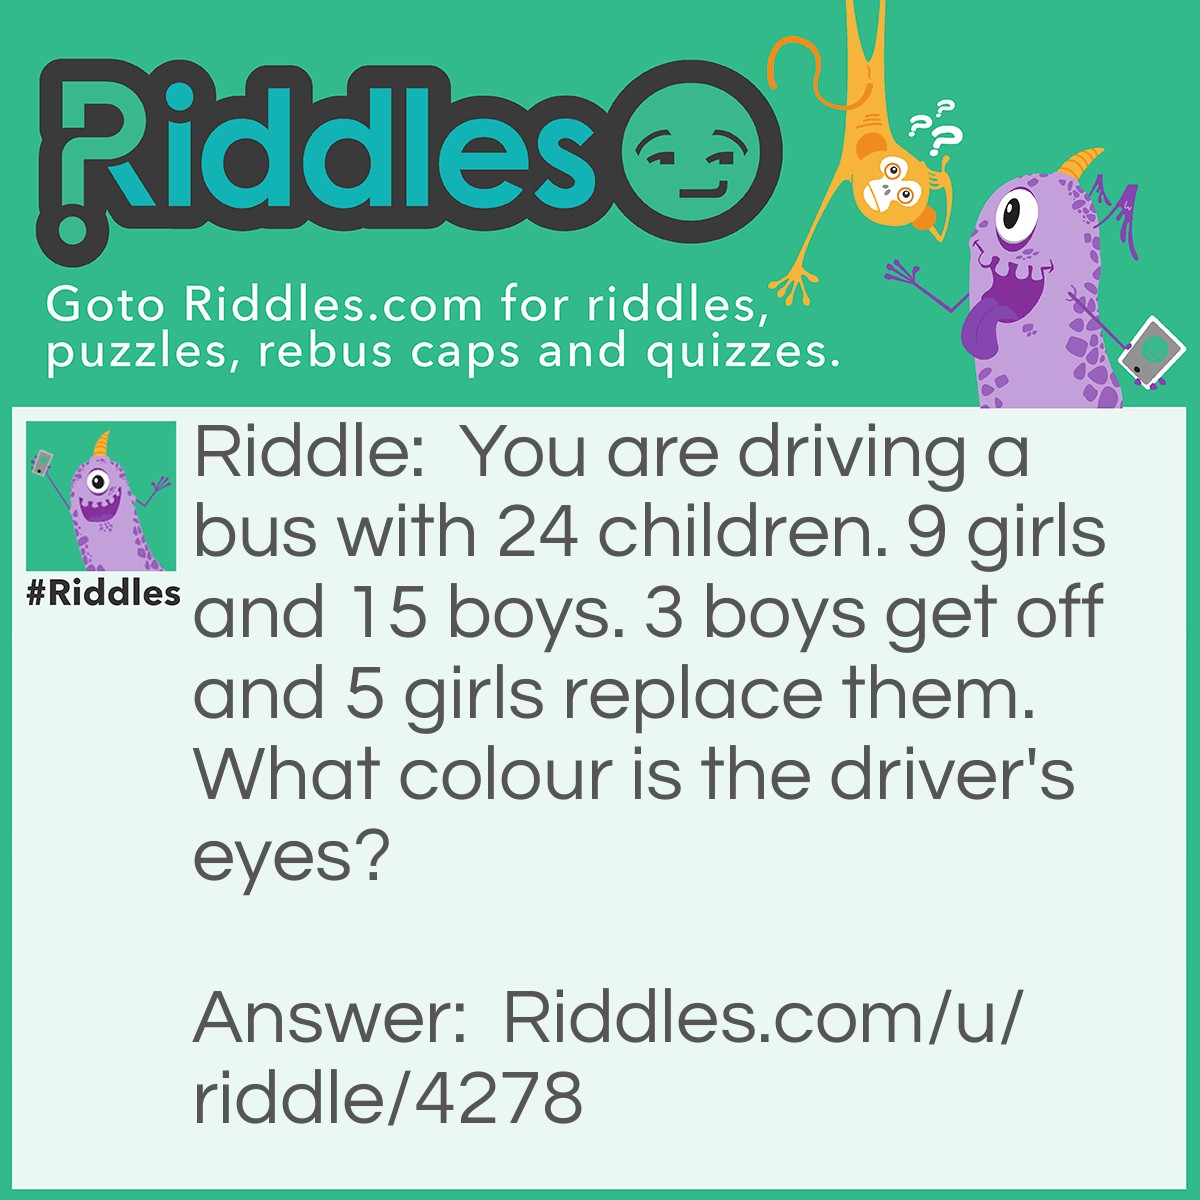 Riddle: You are driving a bus with 24 children. 9 girls and 15 boys. 3 boys get off and 5 girls replace them. What colour is the driver's eyes? Answer: The colour of your eyes, you're the driver!